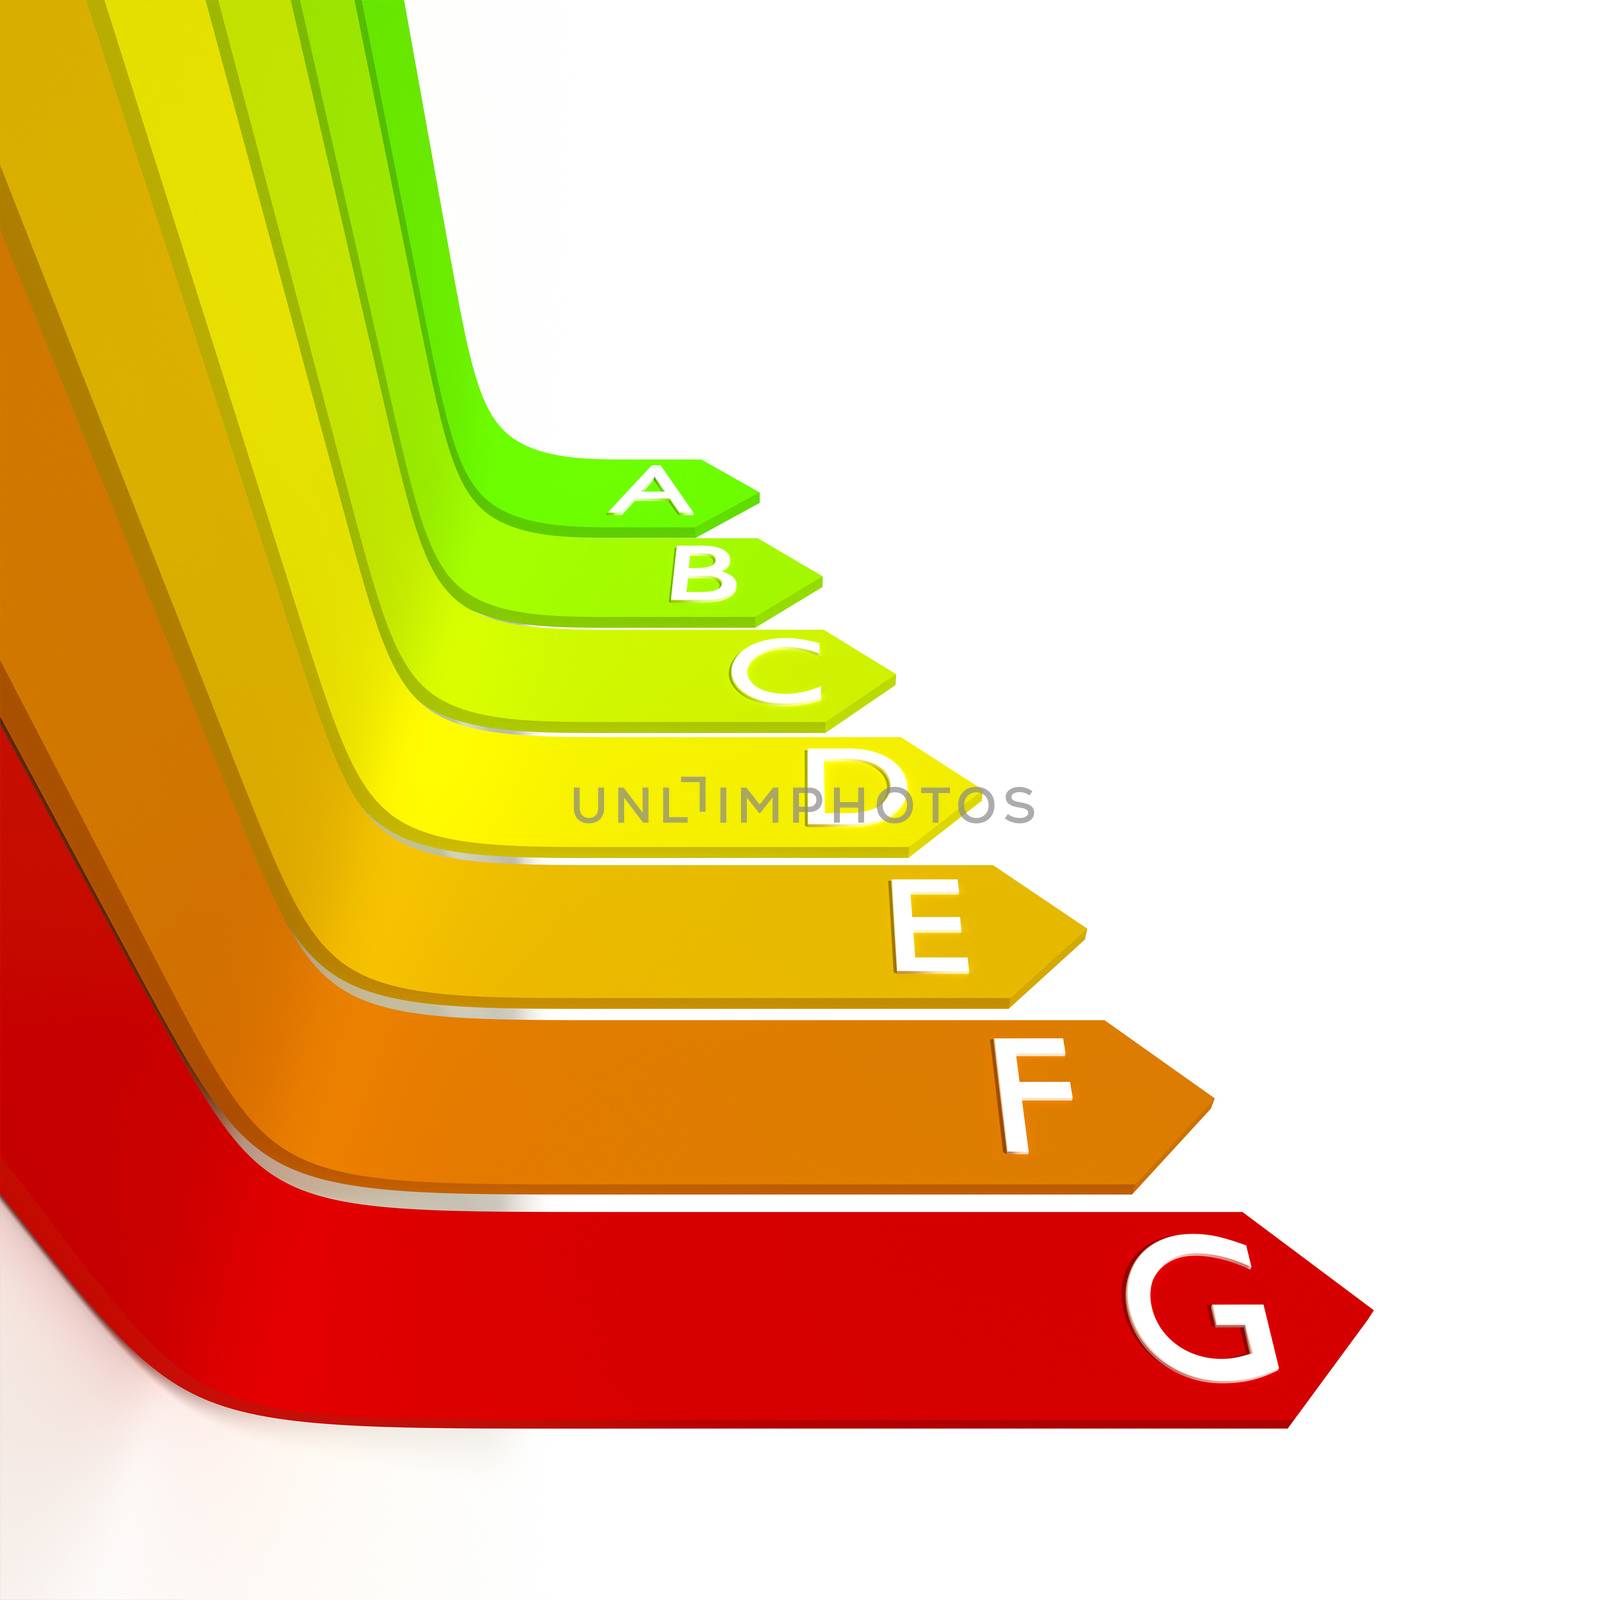 An image of a energy efficiency graphic